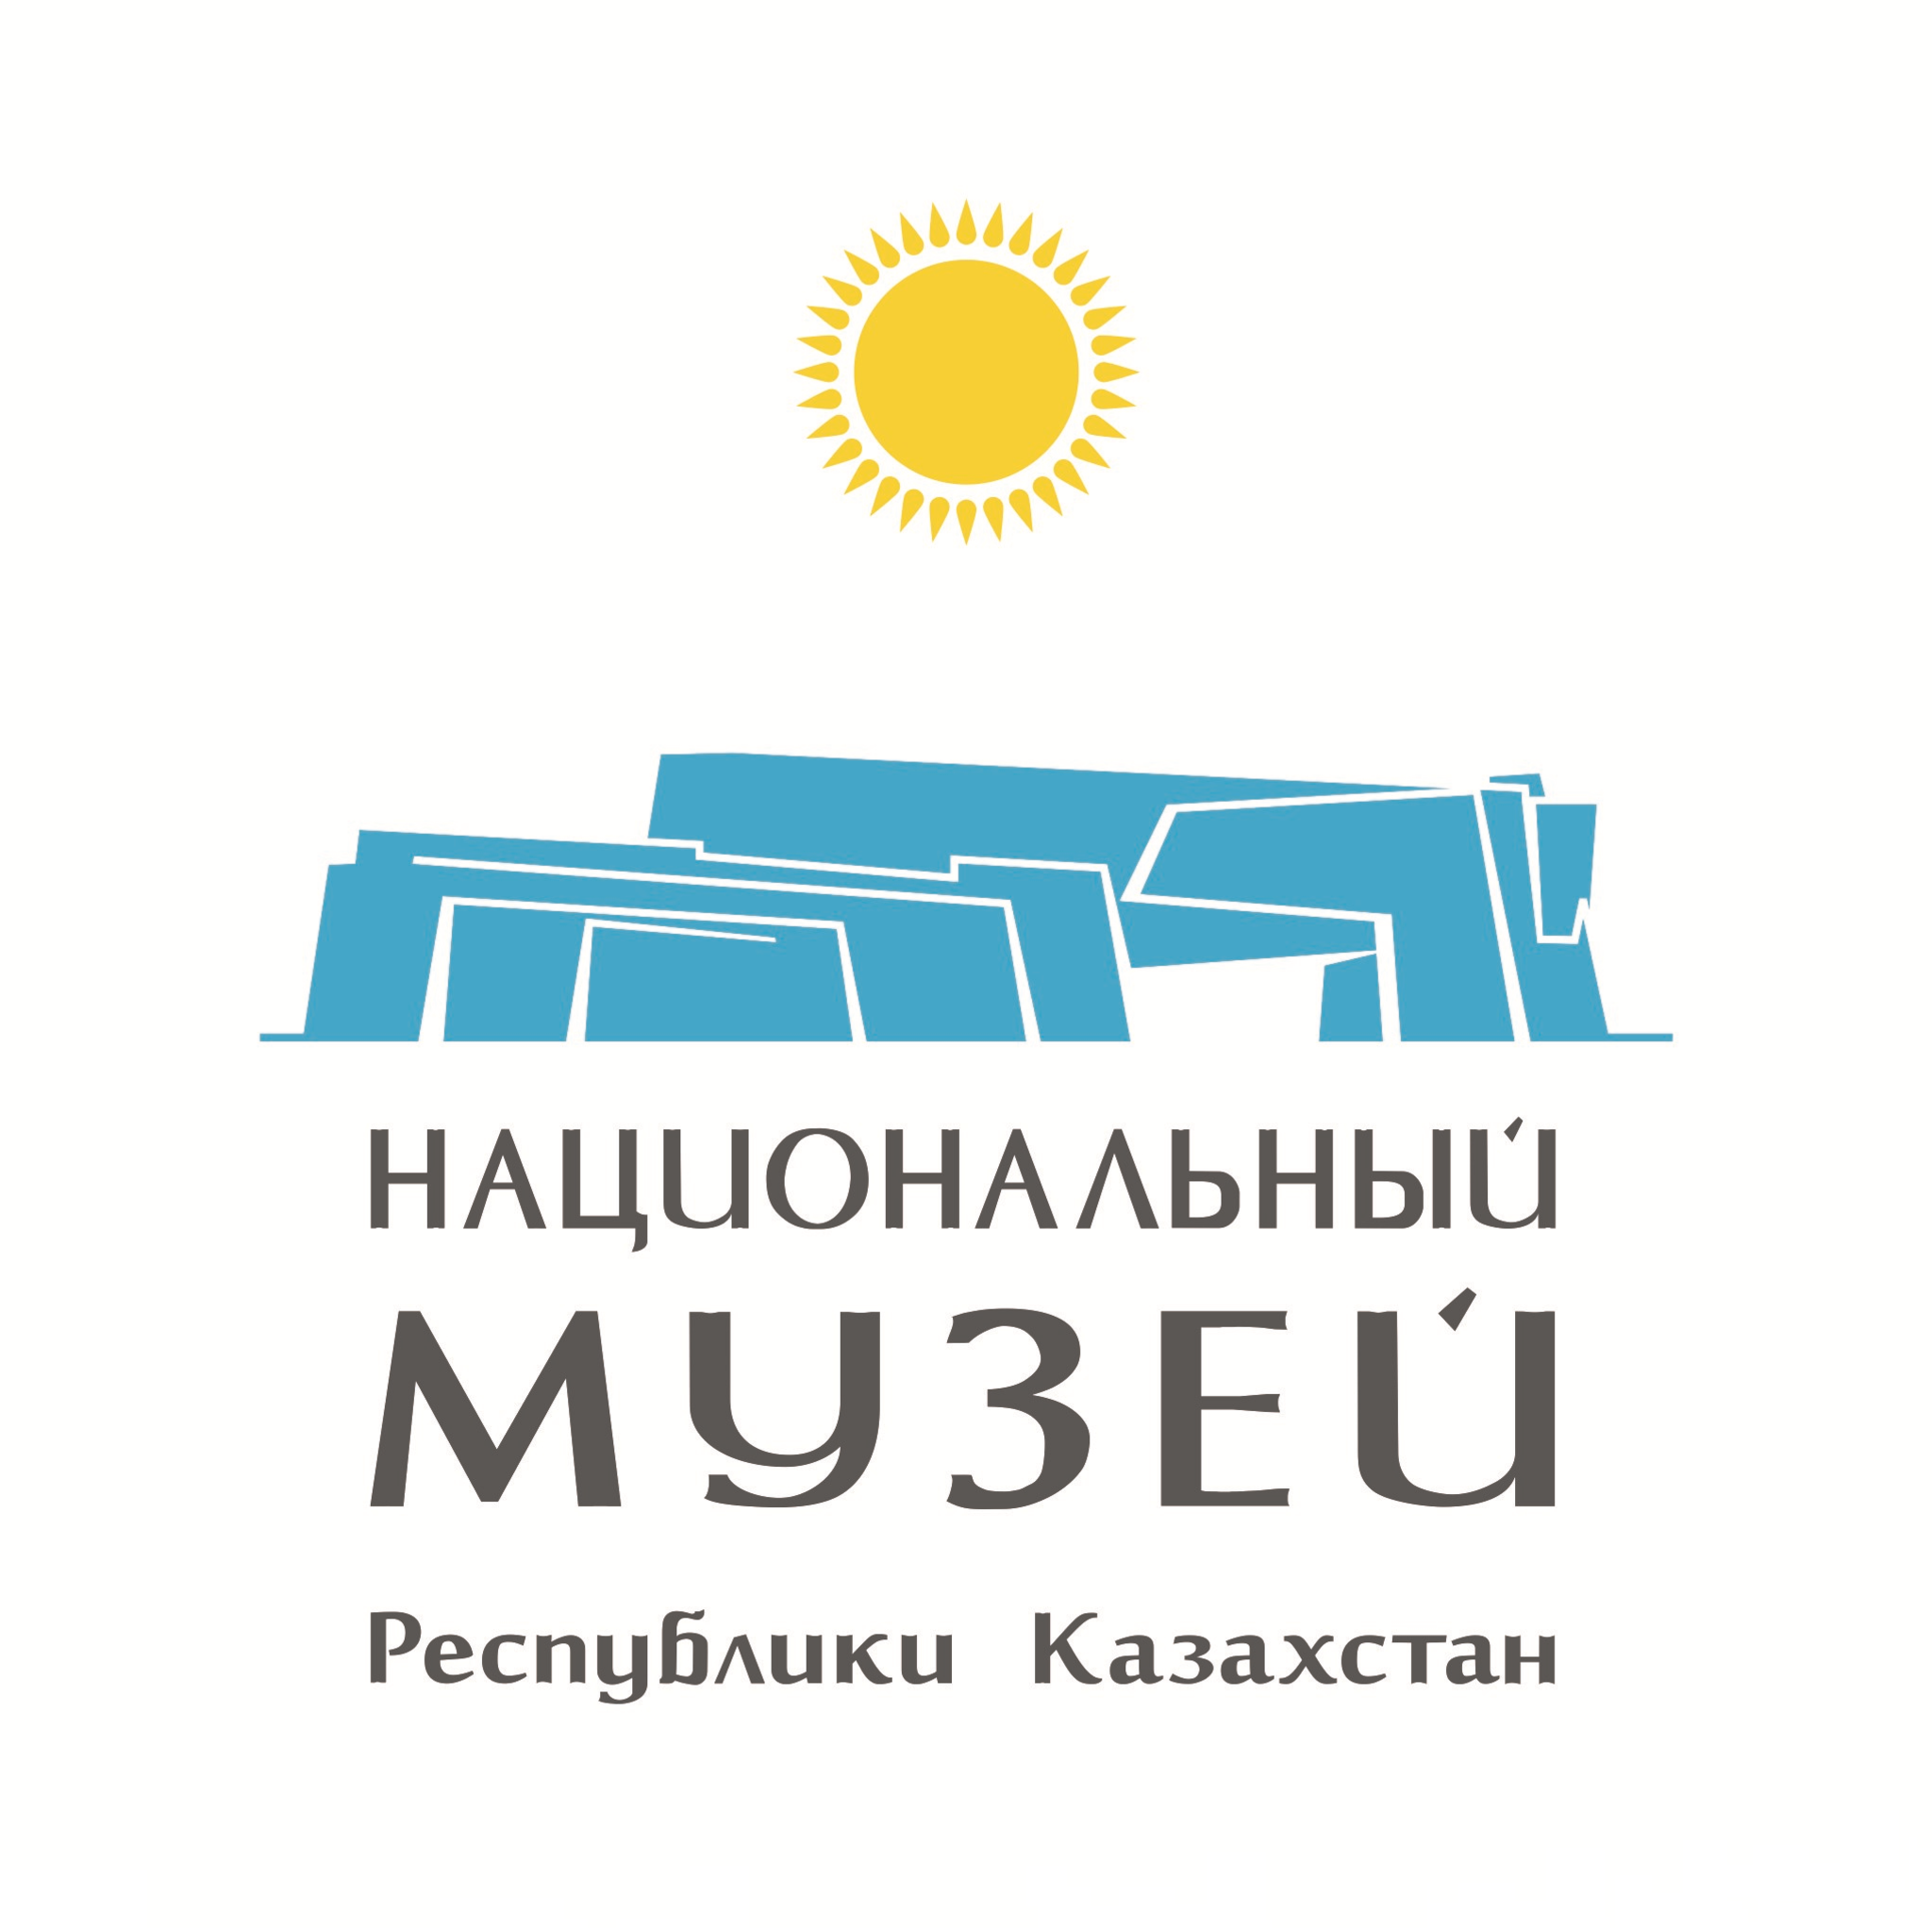 National Museum of the Republic of Kazakhstan announces a competition for the creation of thumbnails